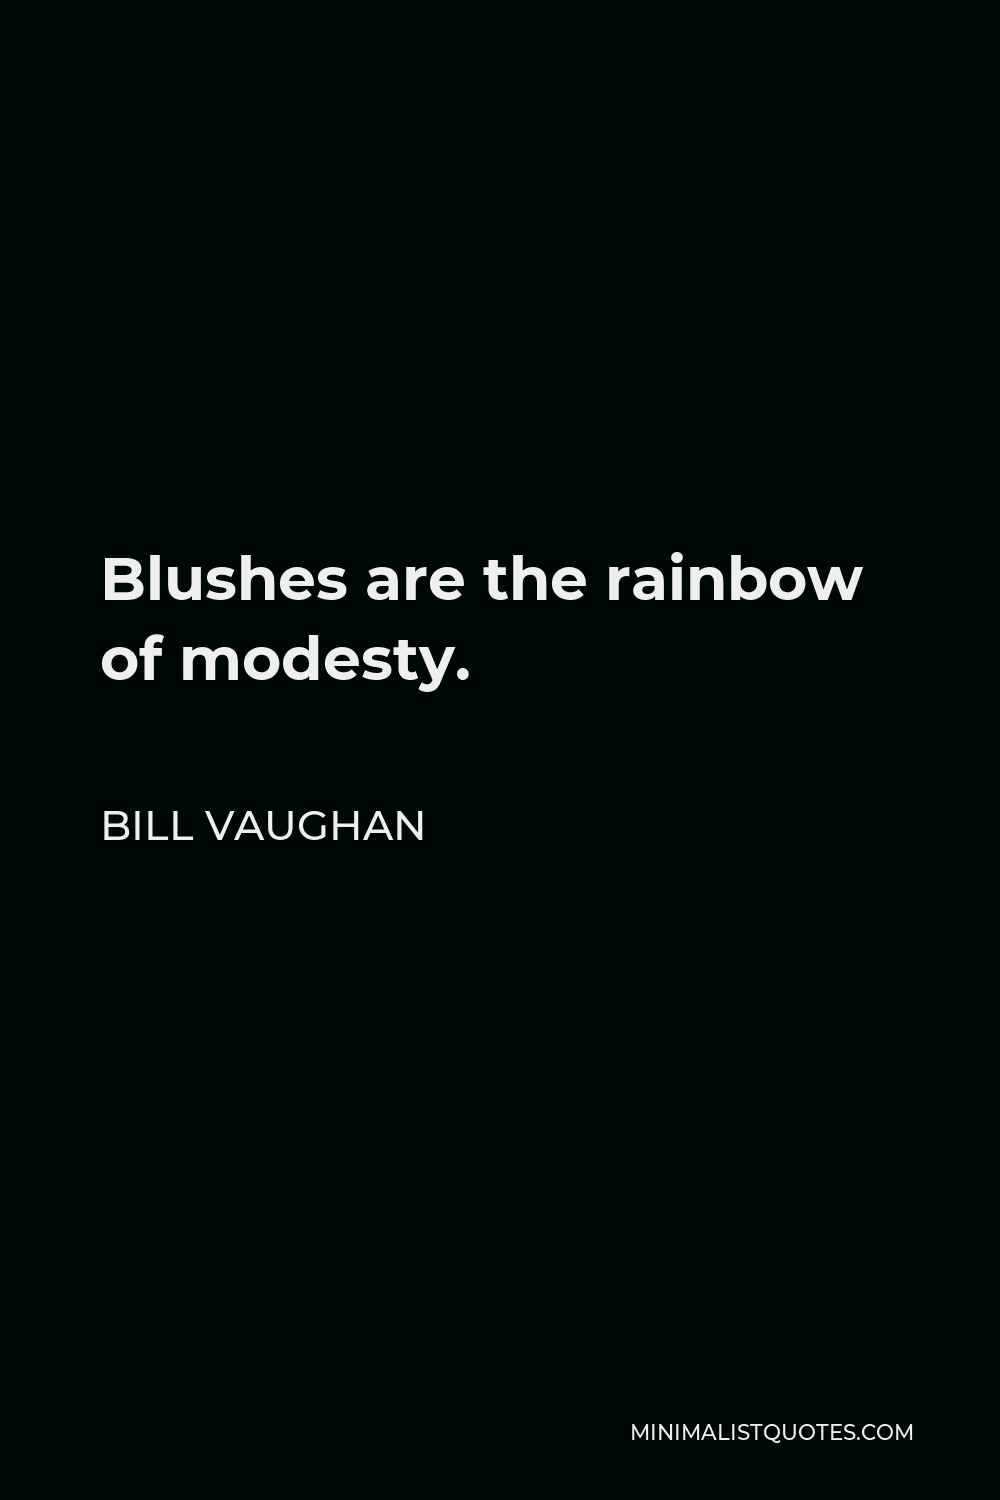 Bill Vaughan Quote - Blushes are the rainbow of modesty.